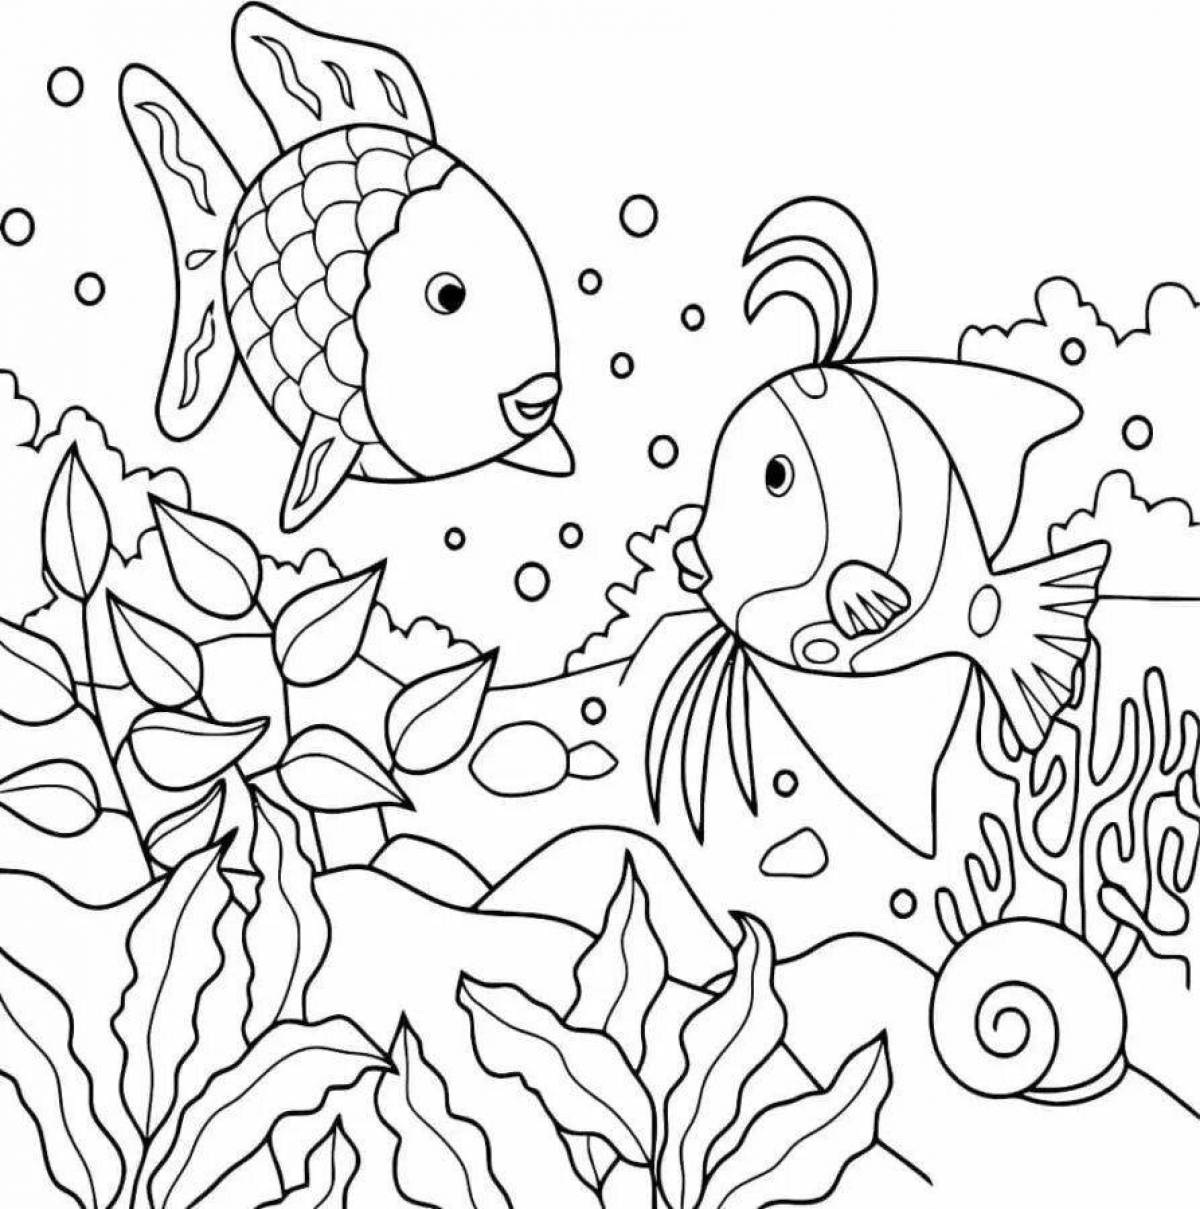 Great underwater world coloring page